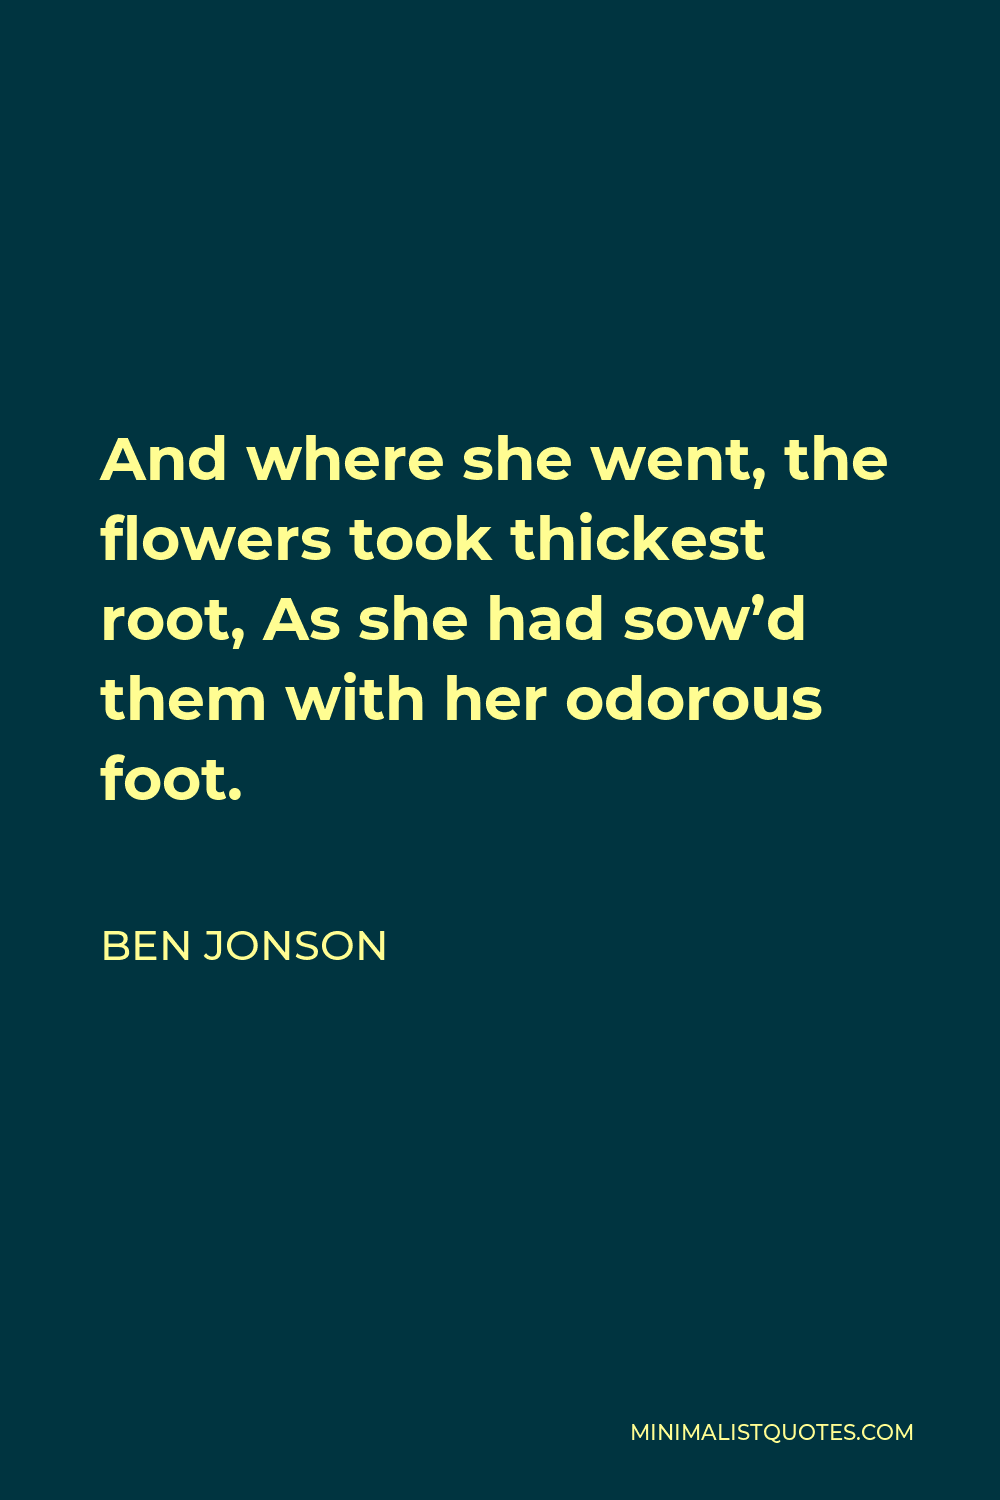 Ben Jonson Quote - And where she went, the flowers took thickest root, As she had sow’d them with her odorous foot.